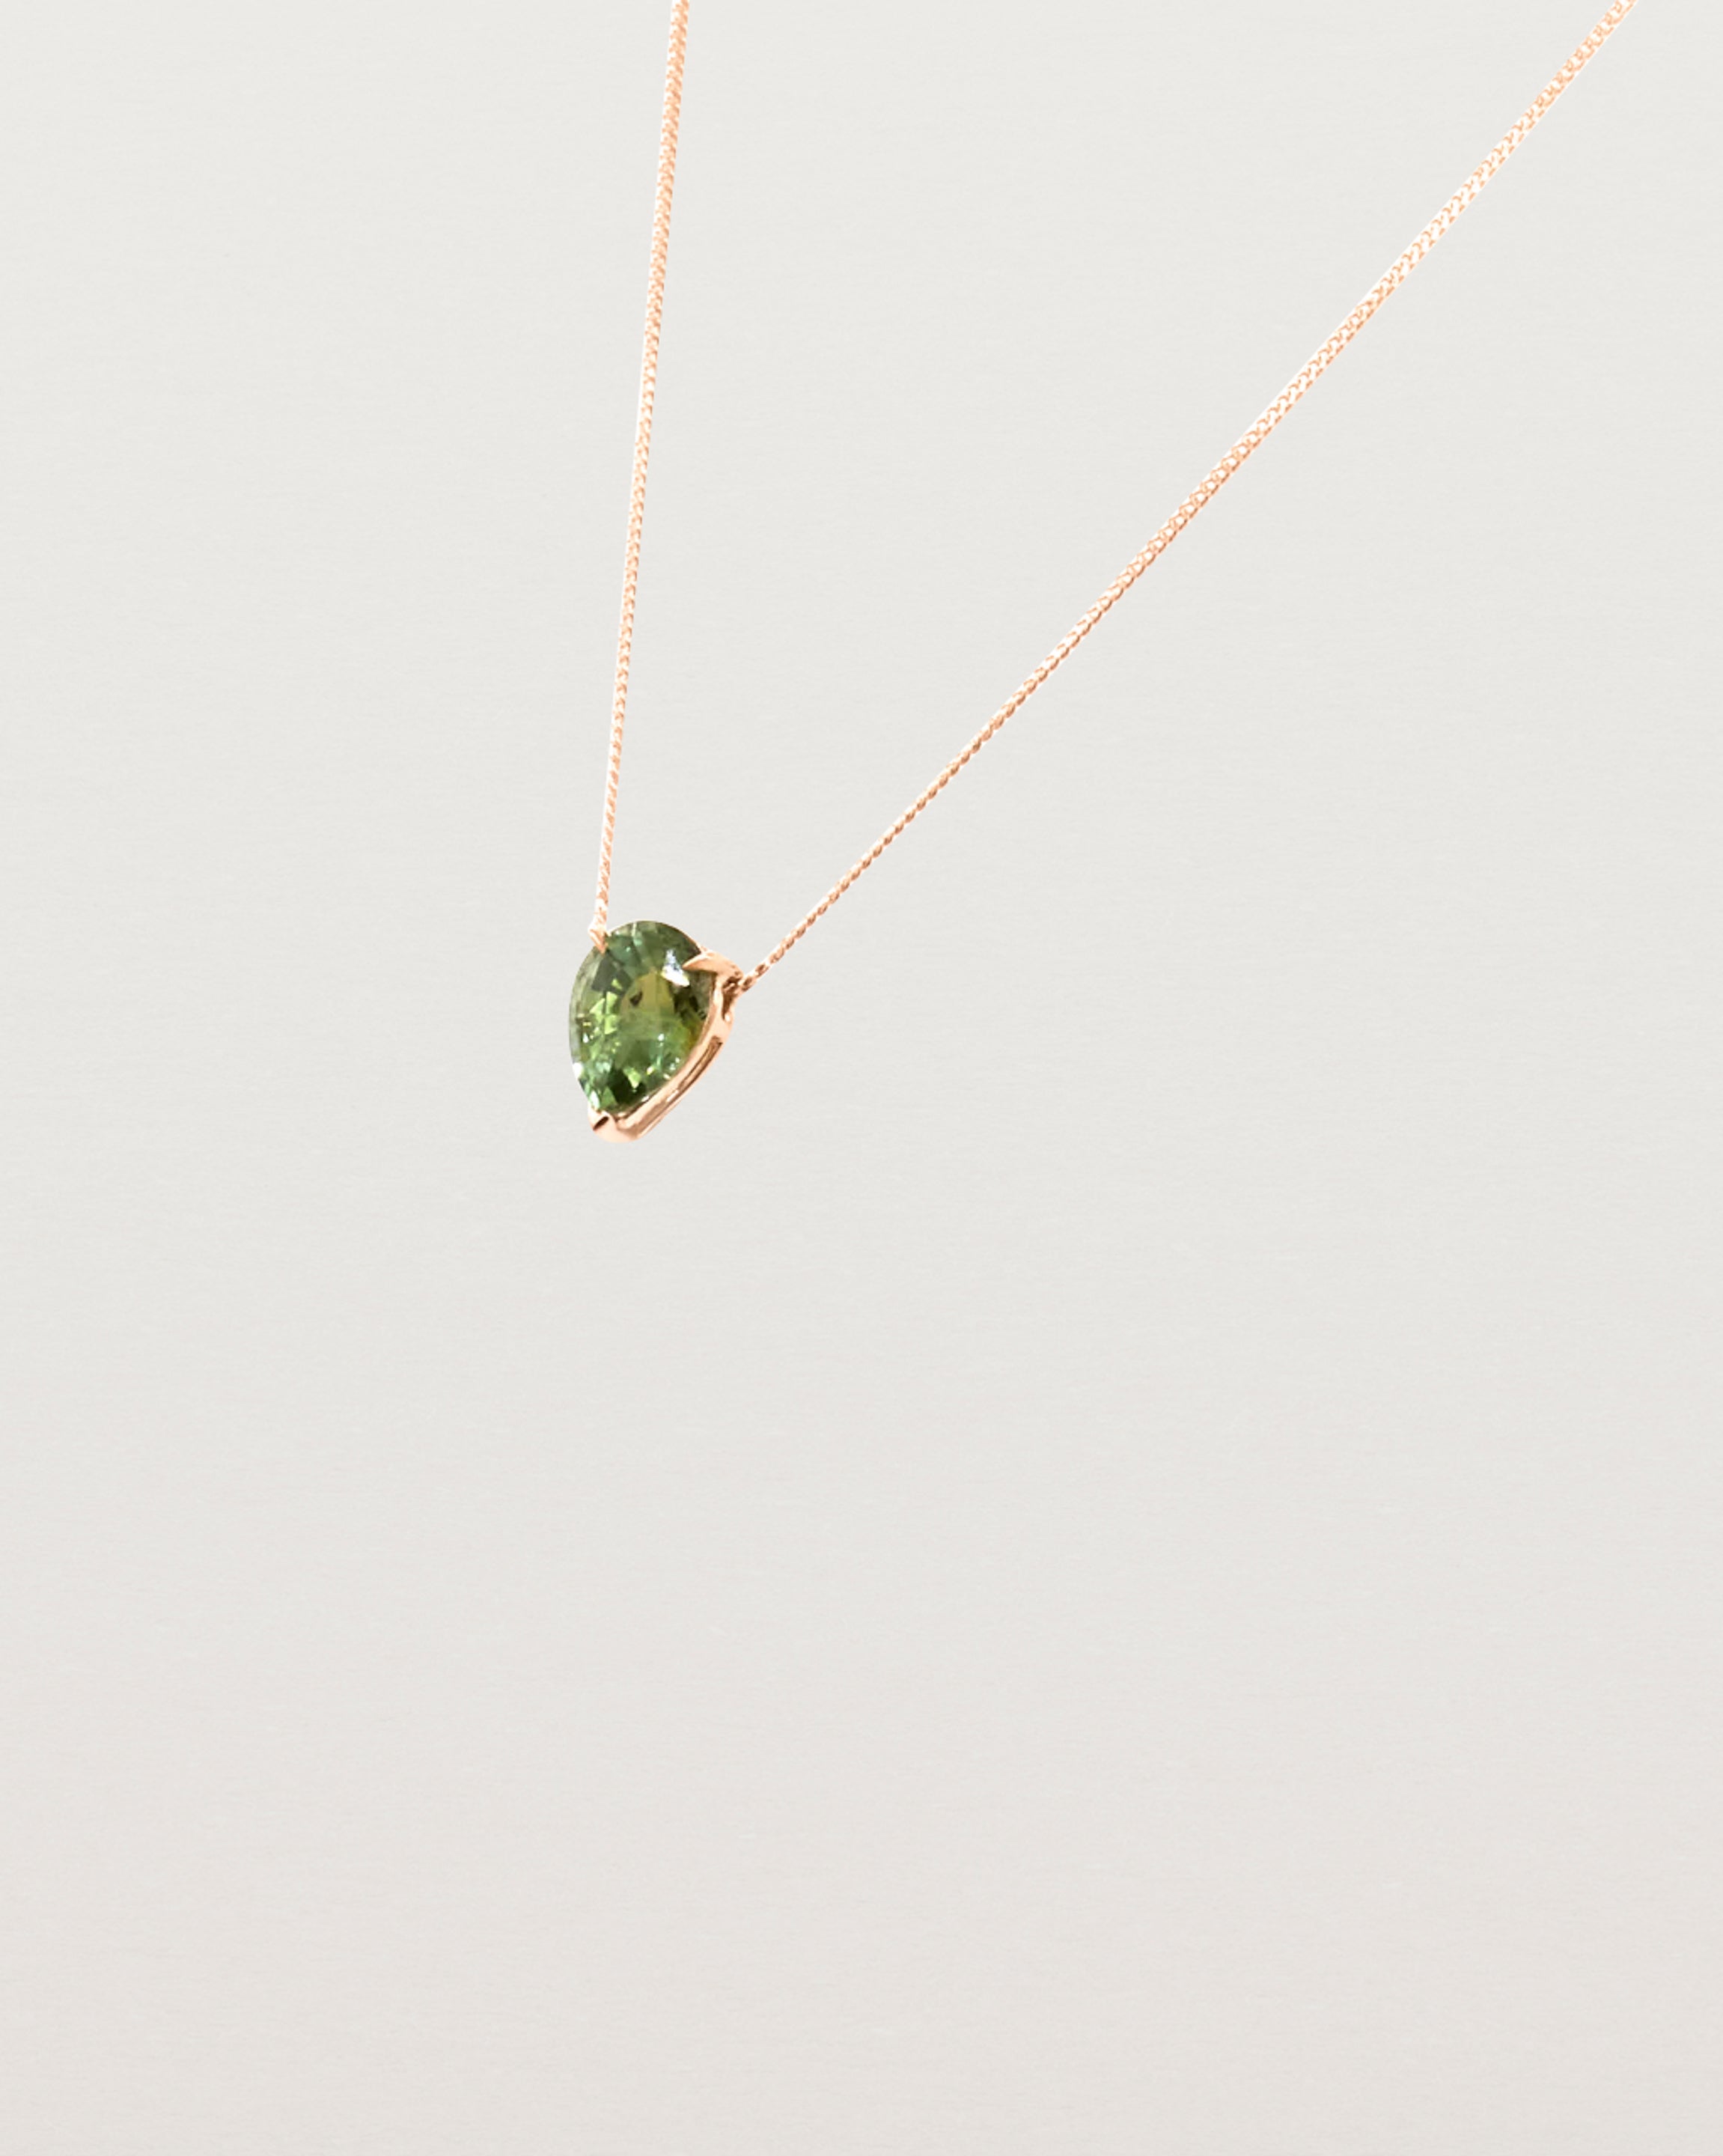 A Madagascan pear sapphire, is set in our classic slider pendant design. 